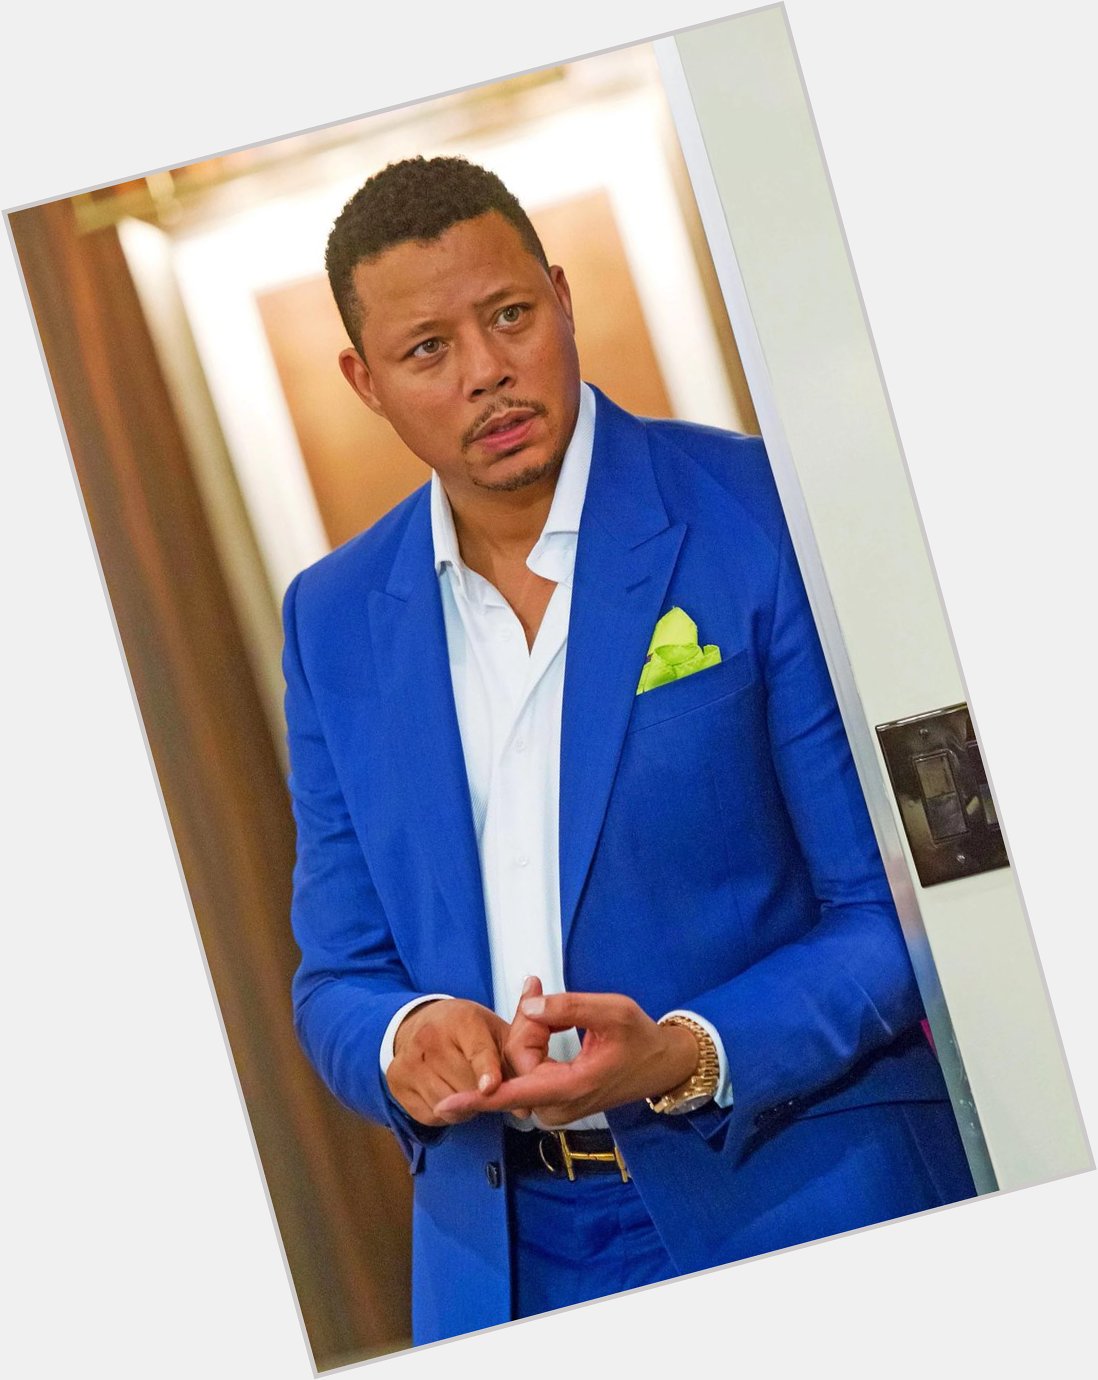 Wishing a Happy 52nd Birthday to Terrence Howard  . What s your favorite tv/movie role by him?  